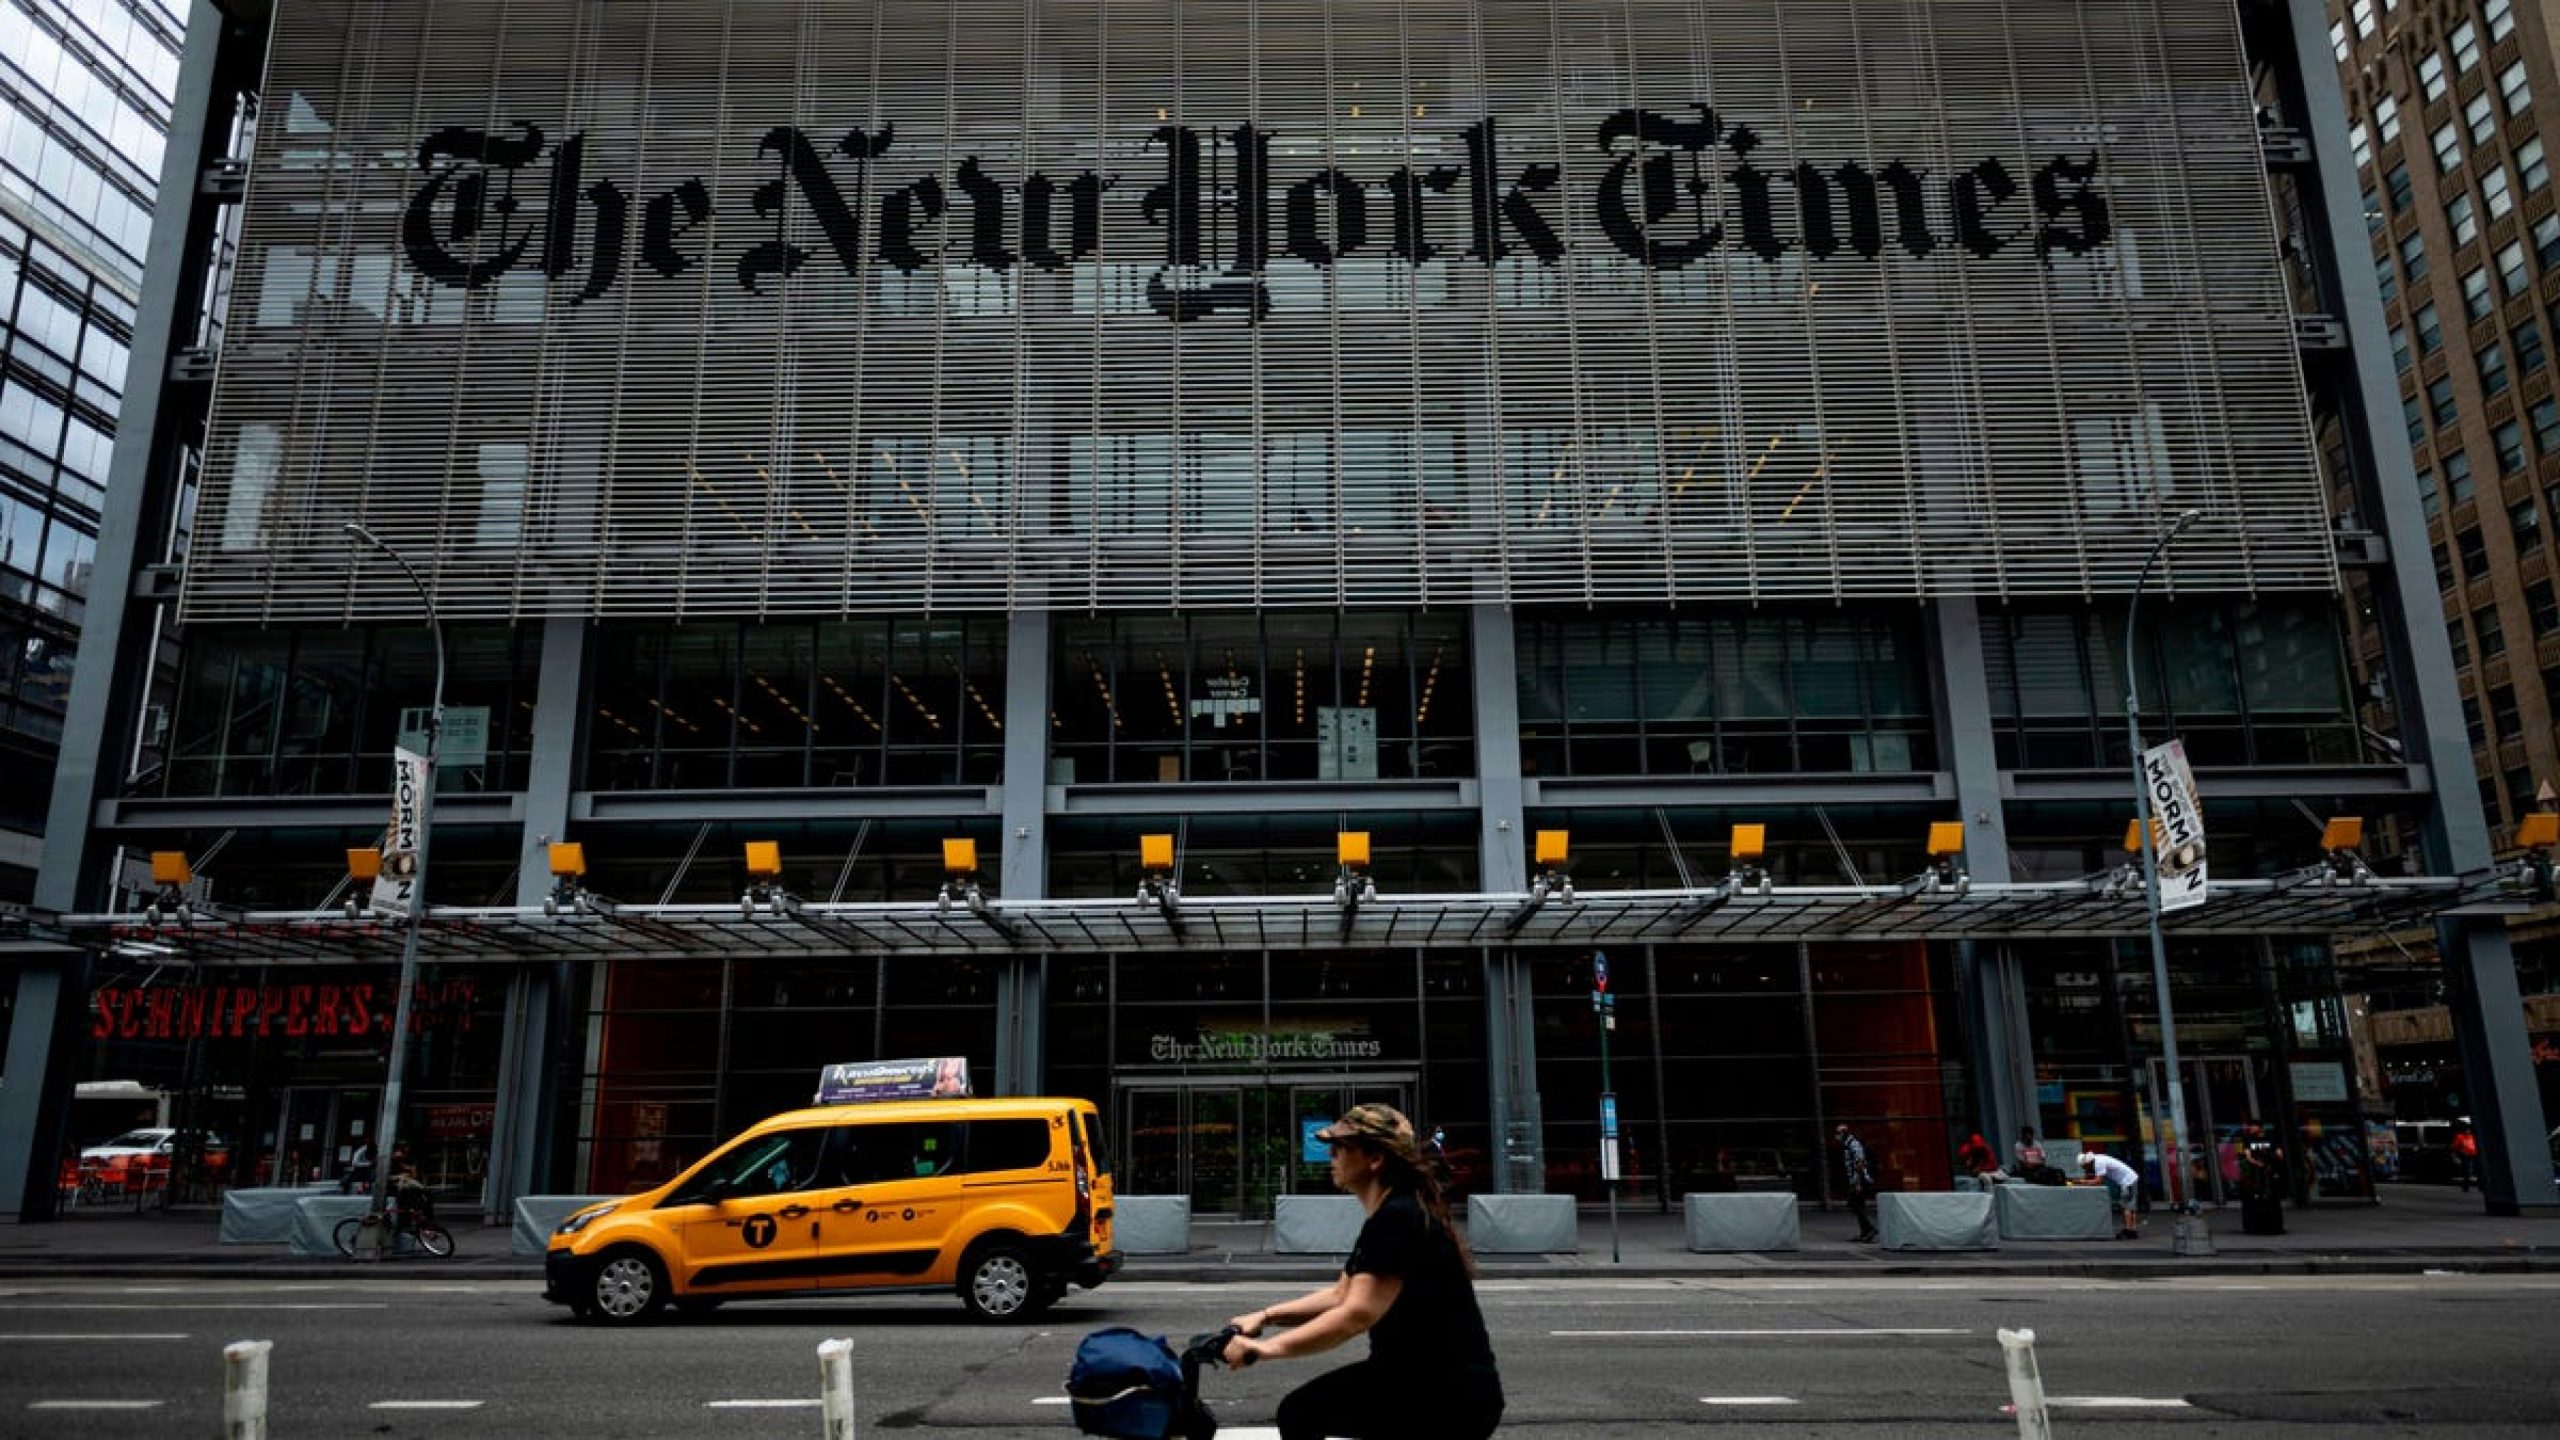 New York Times Lawyer Mistakenly Sends Private Email on How to Deal With the Union to… the Union